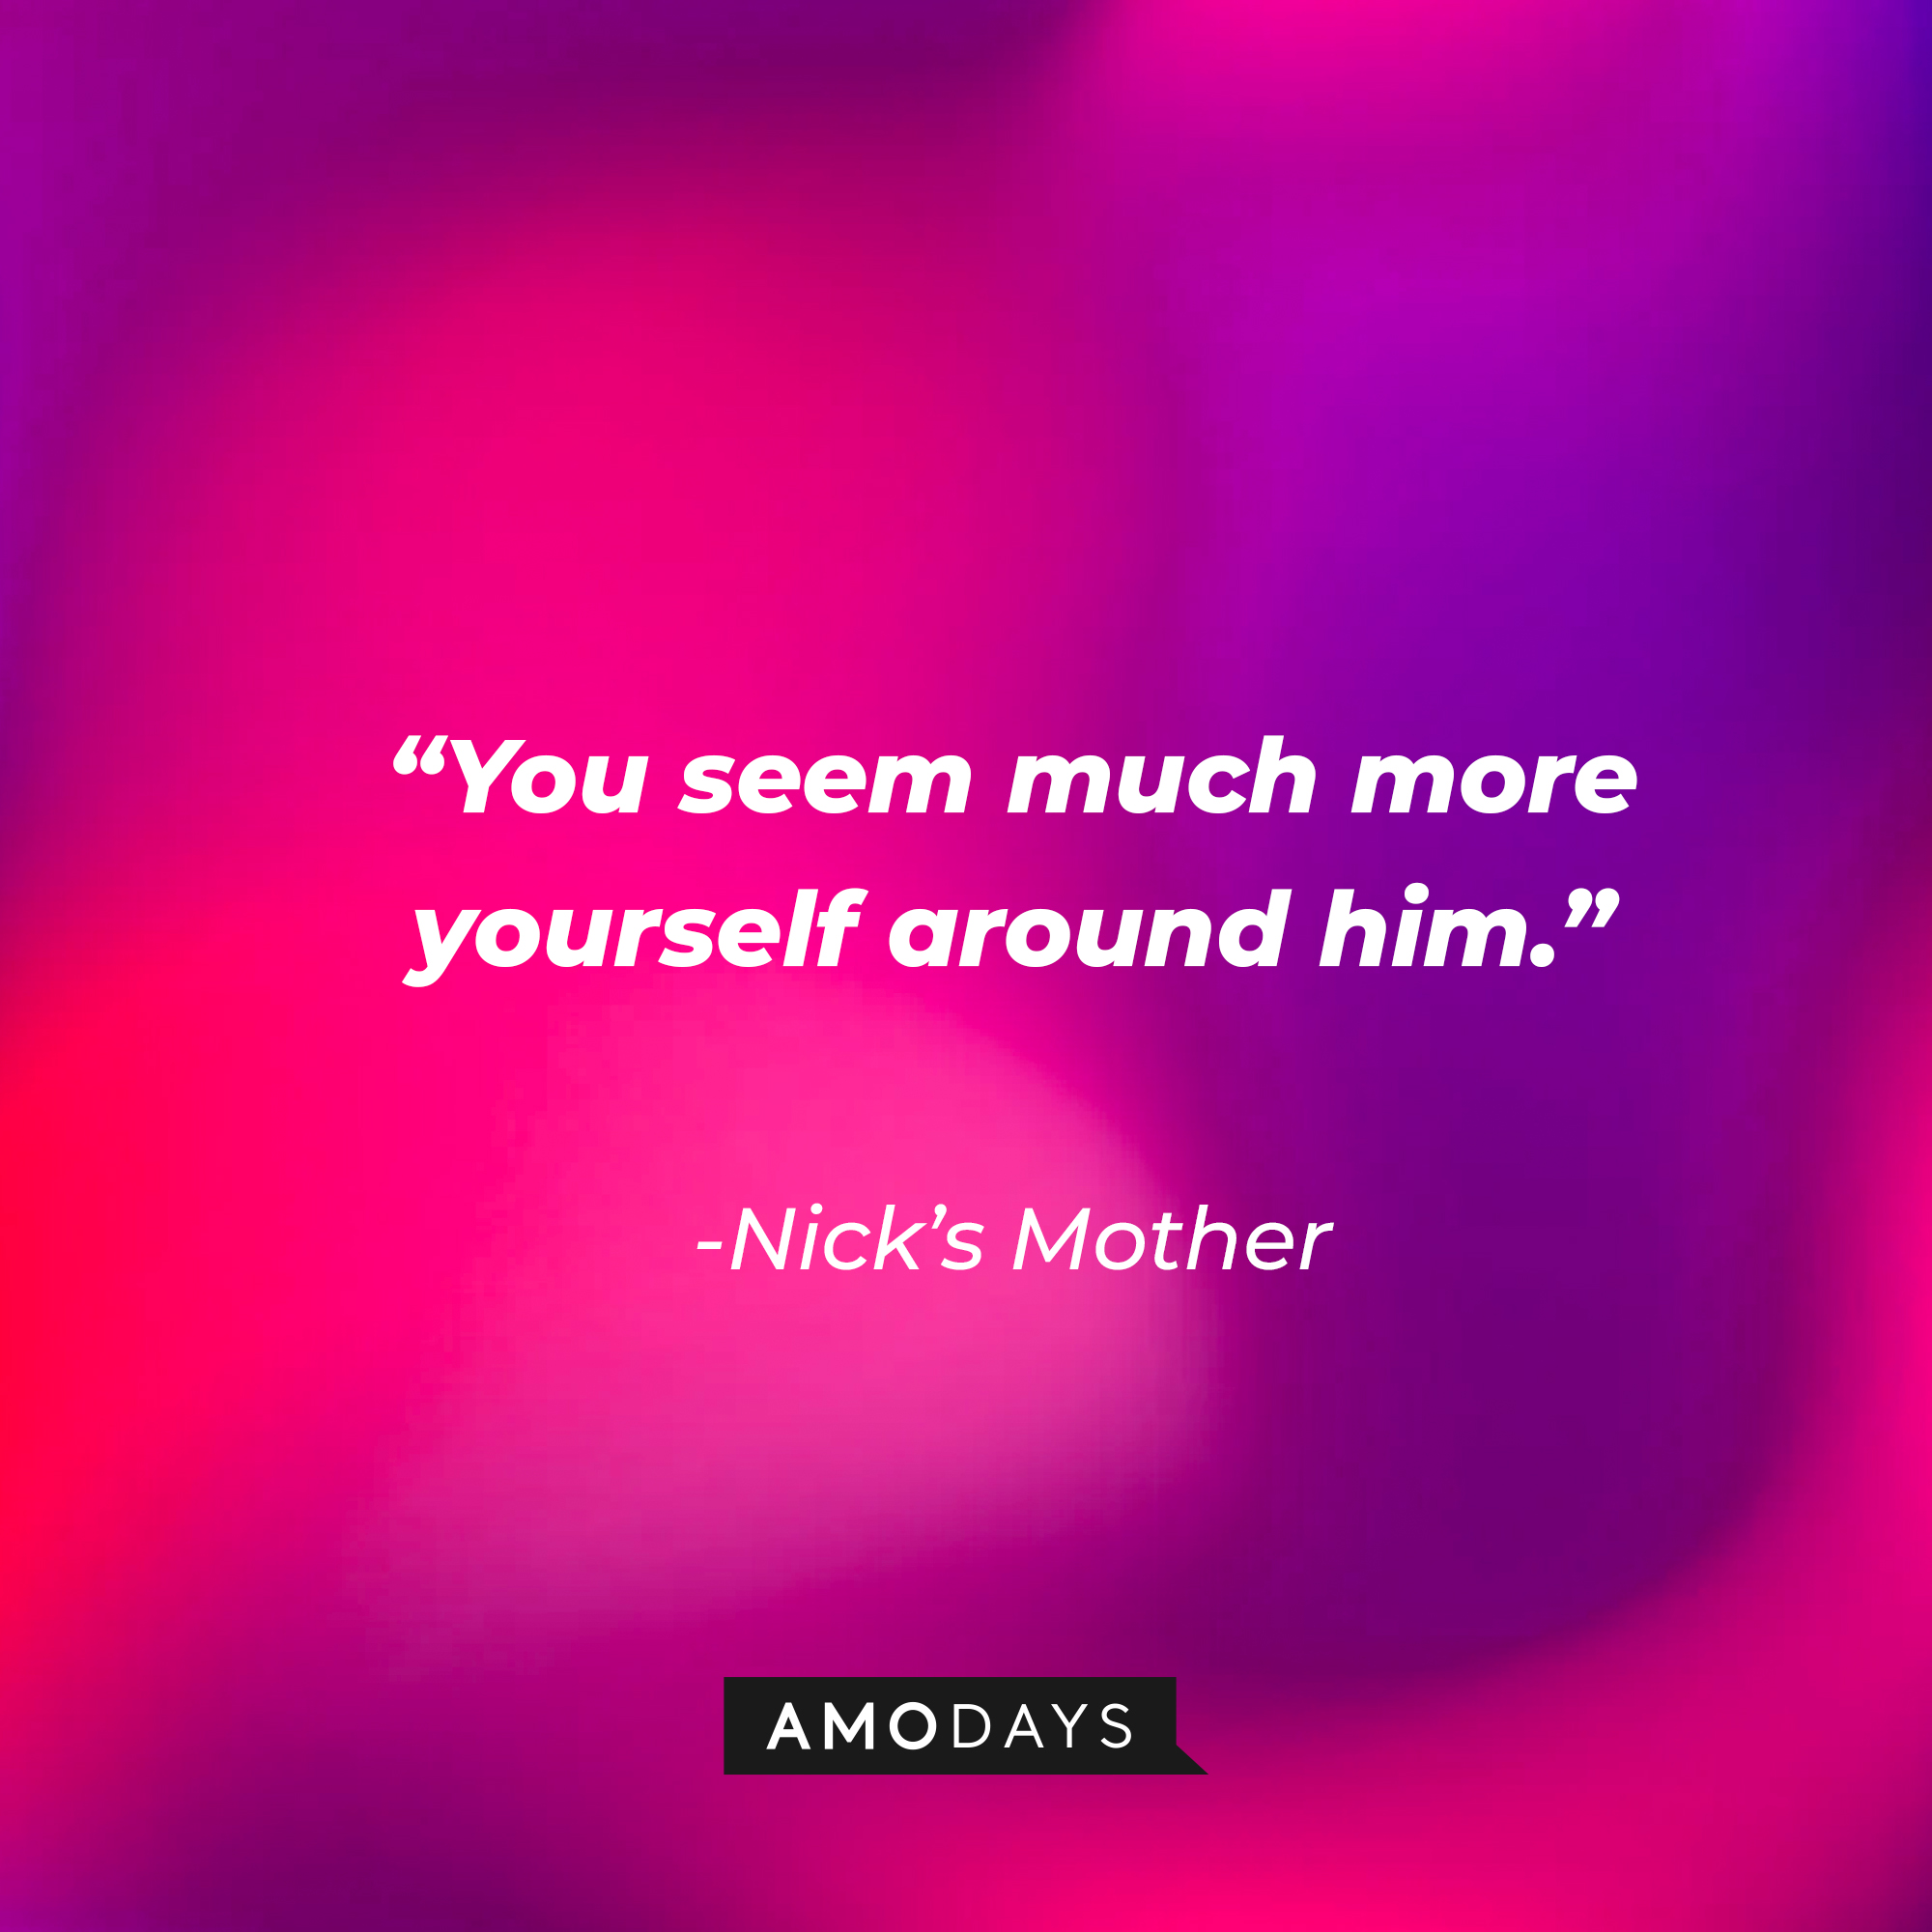 Nick’s Mother’s quote: “You seem much more yourself around him.” | Source: AmoDays